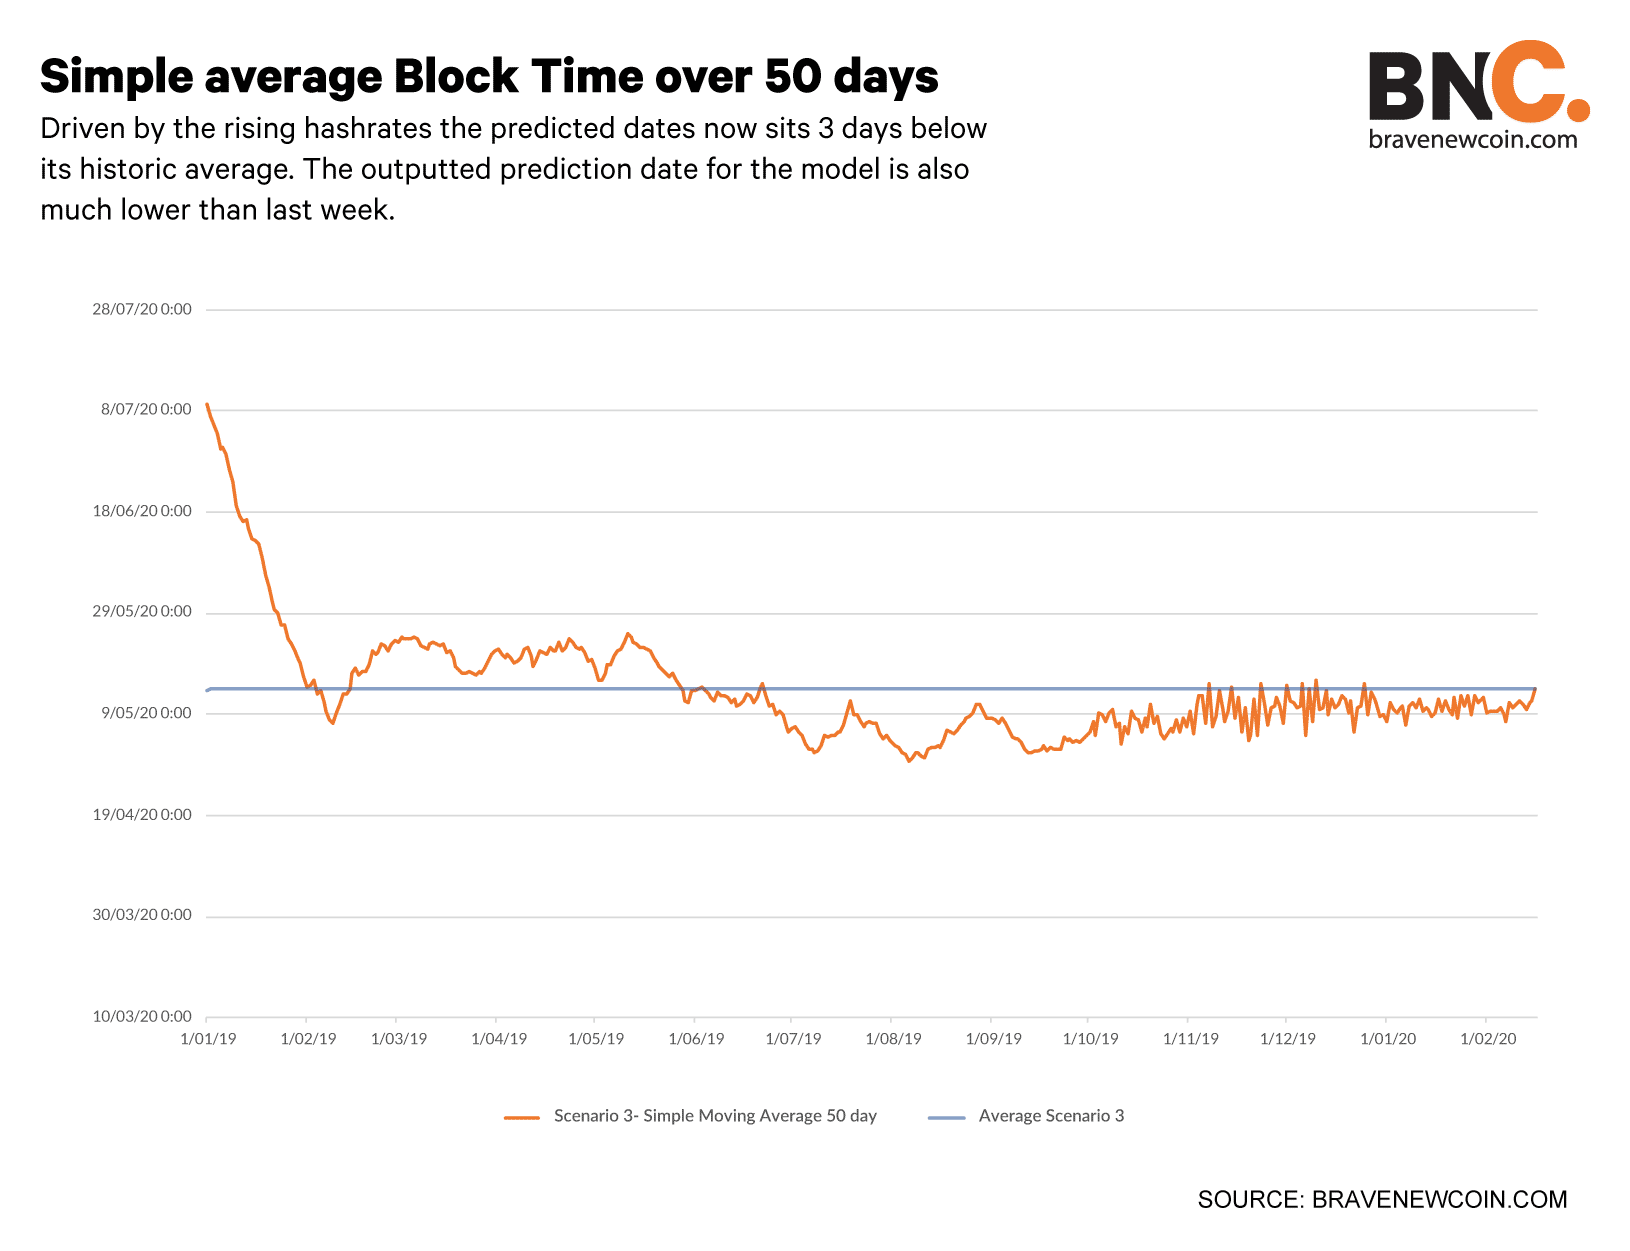 Simple-average-block-time-over-50-days